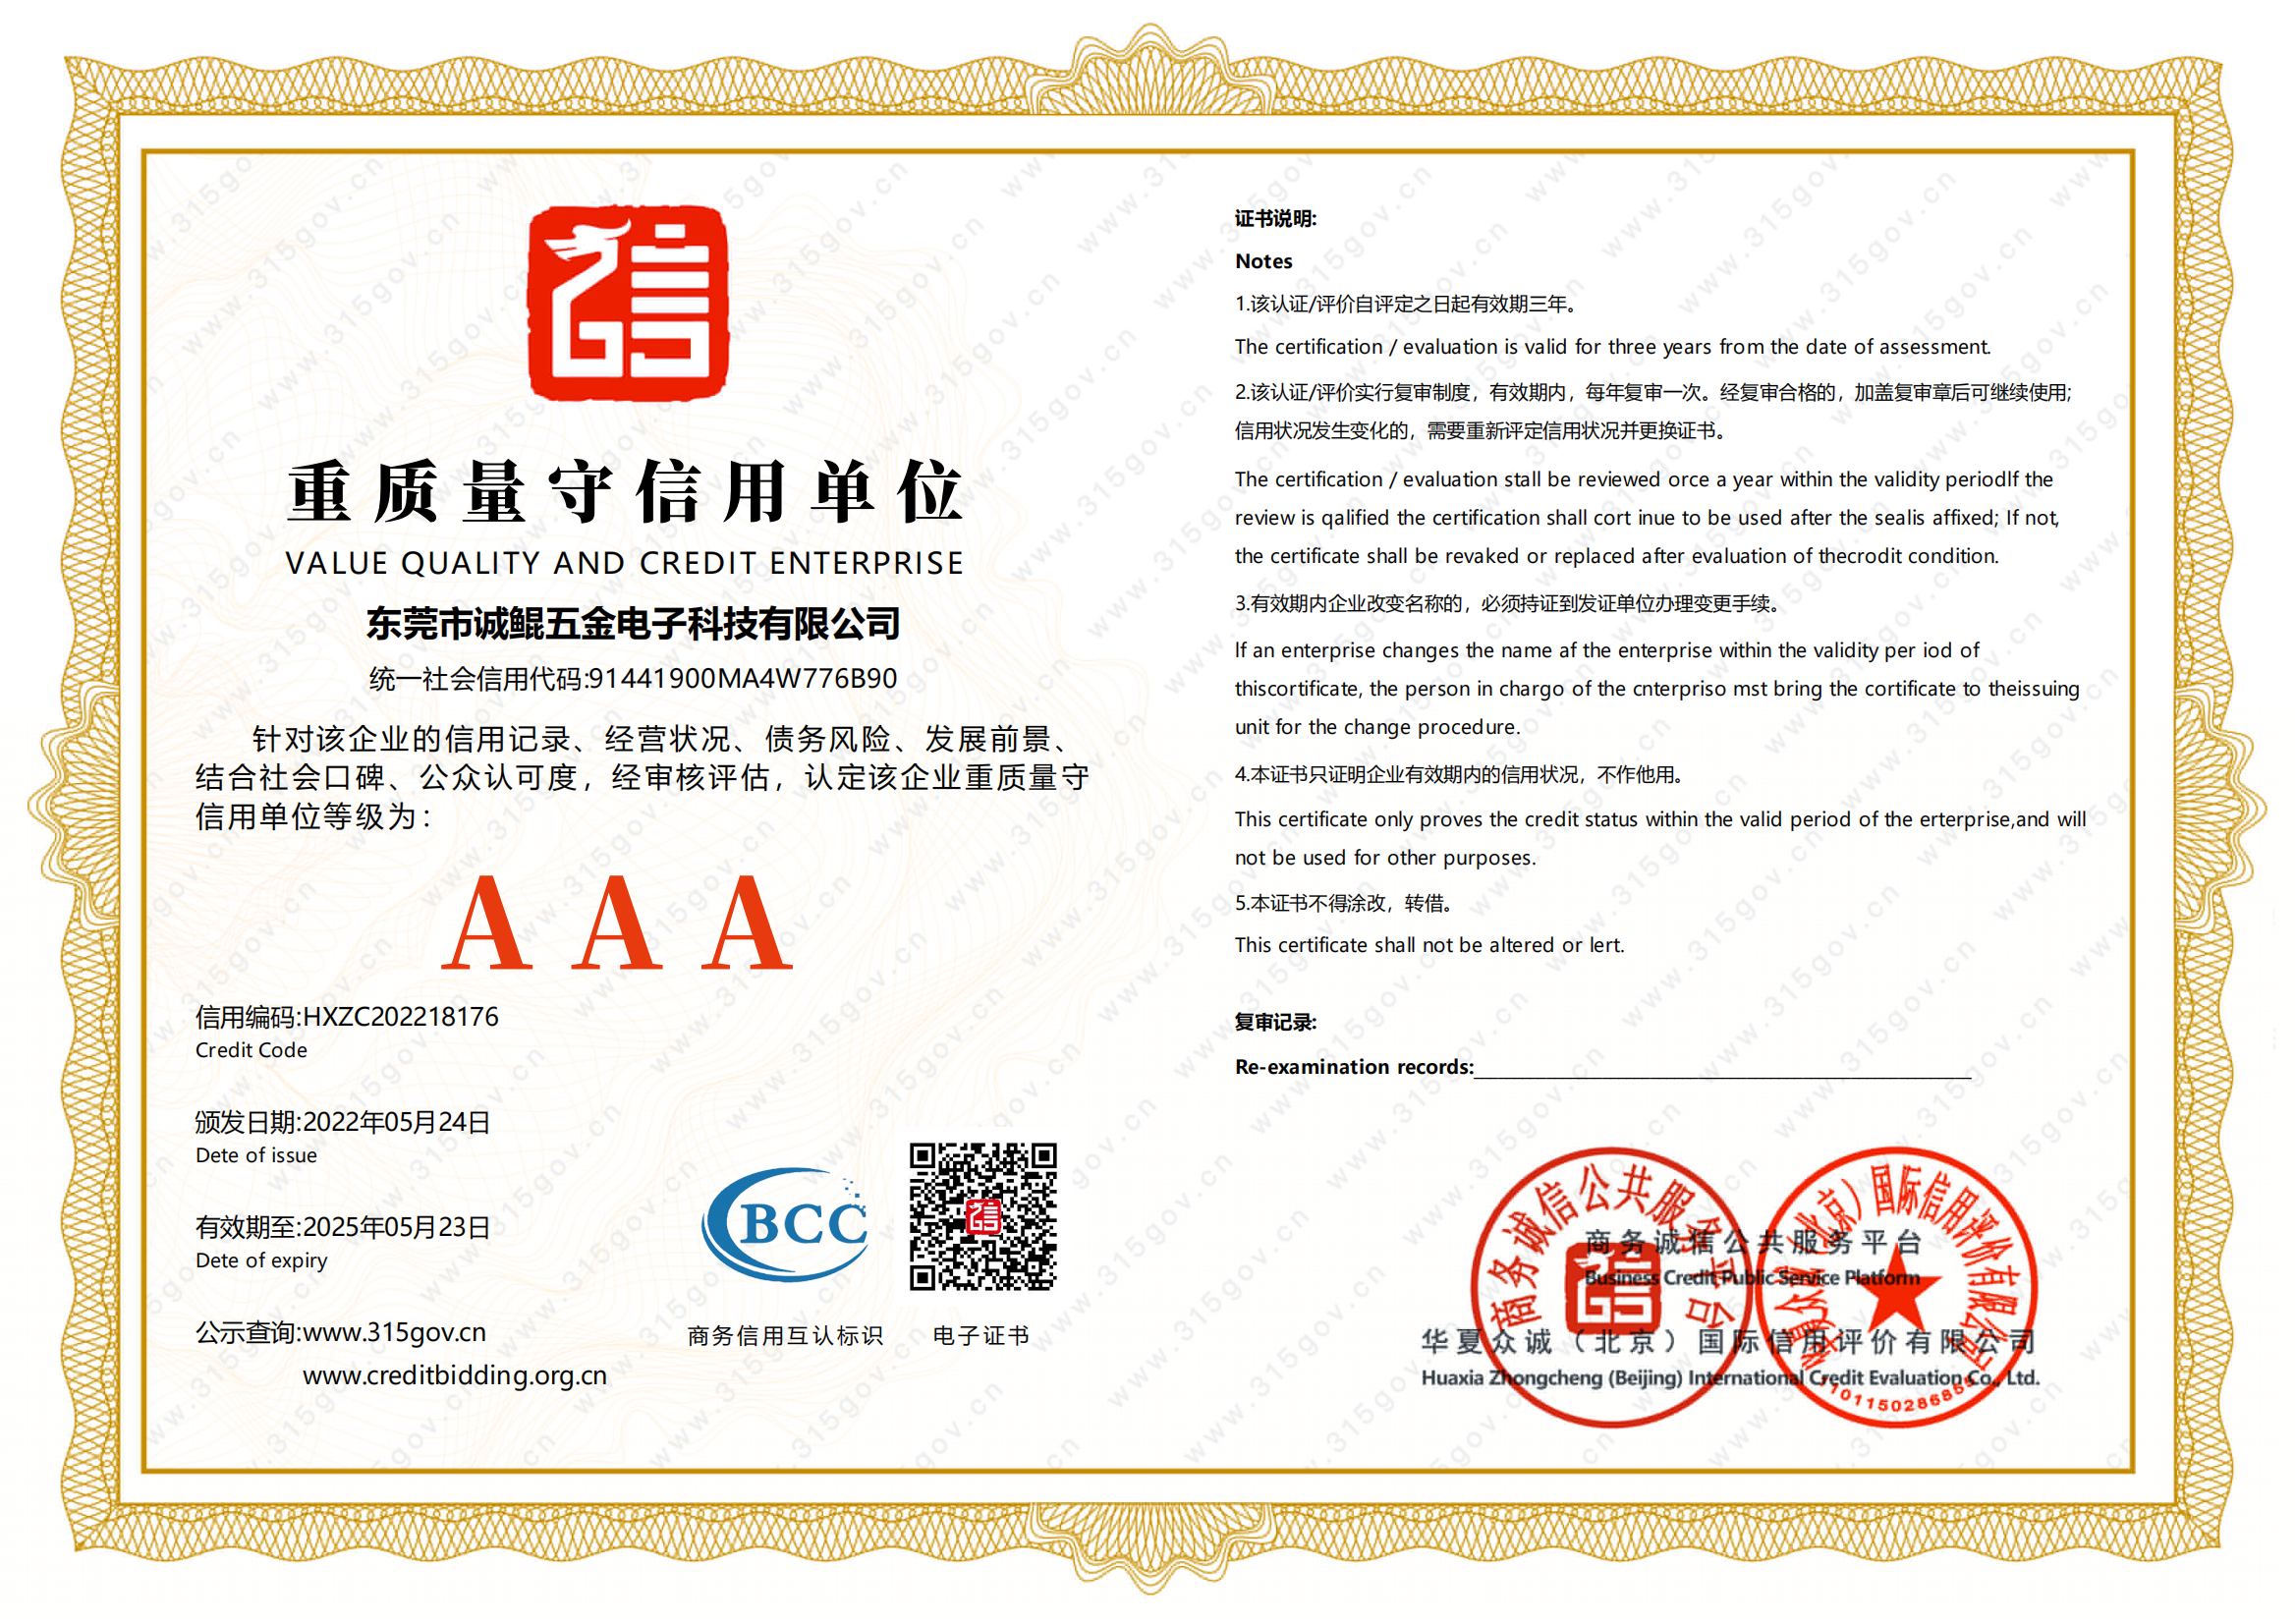 Value quality and credit enterprise certificate